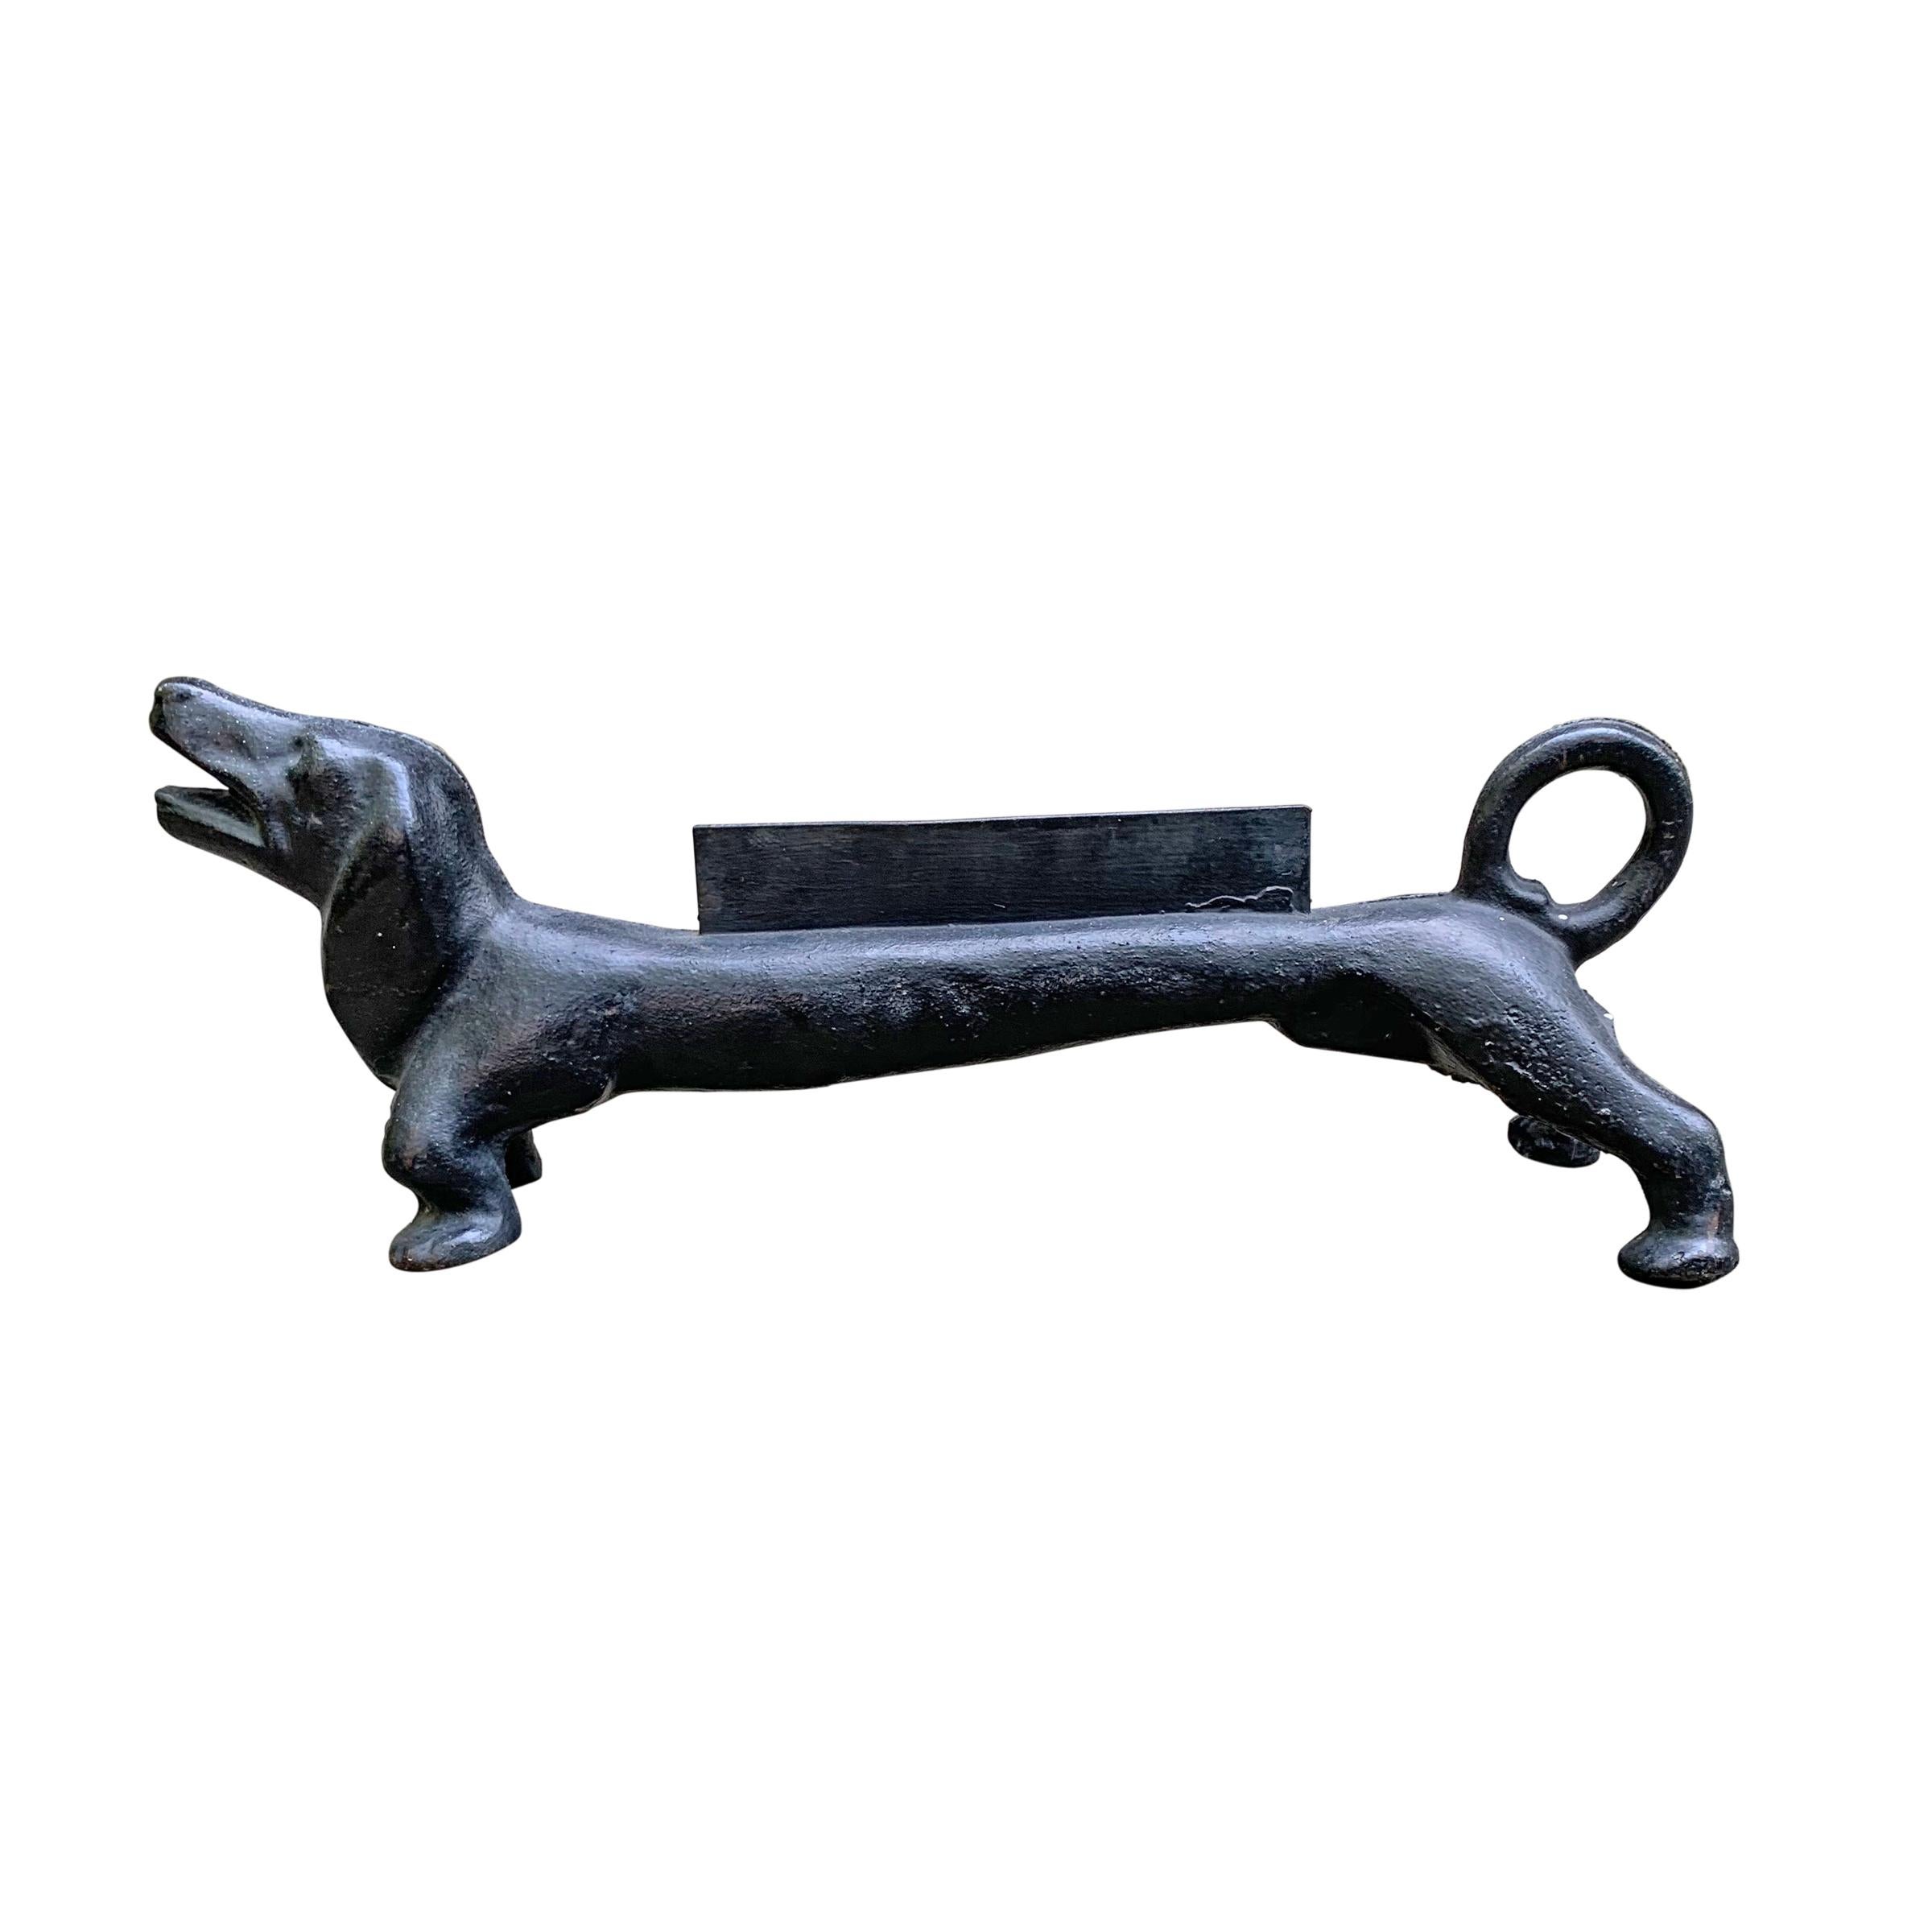 A whimsical late 19th century American red painted cast iron dachshund boot scraper, with an open mouth and sweet expression.